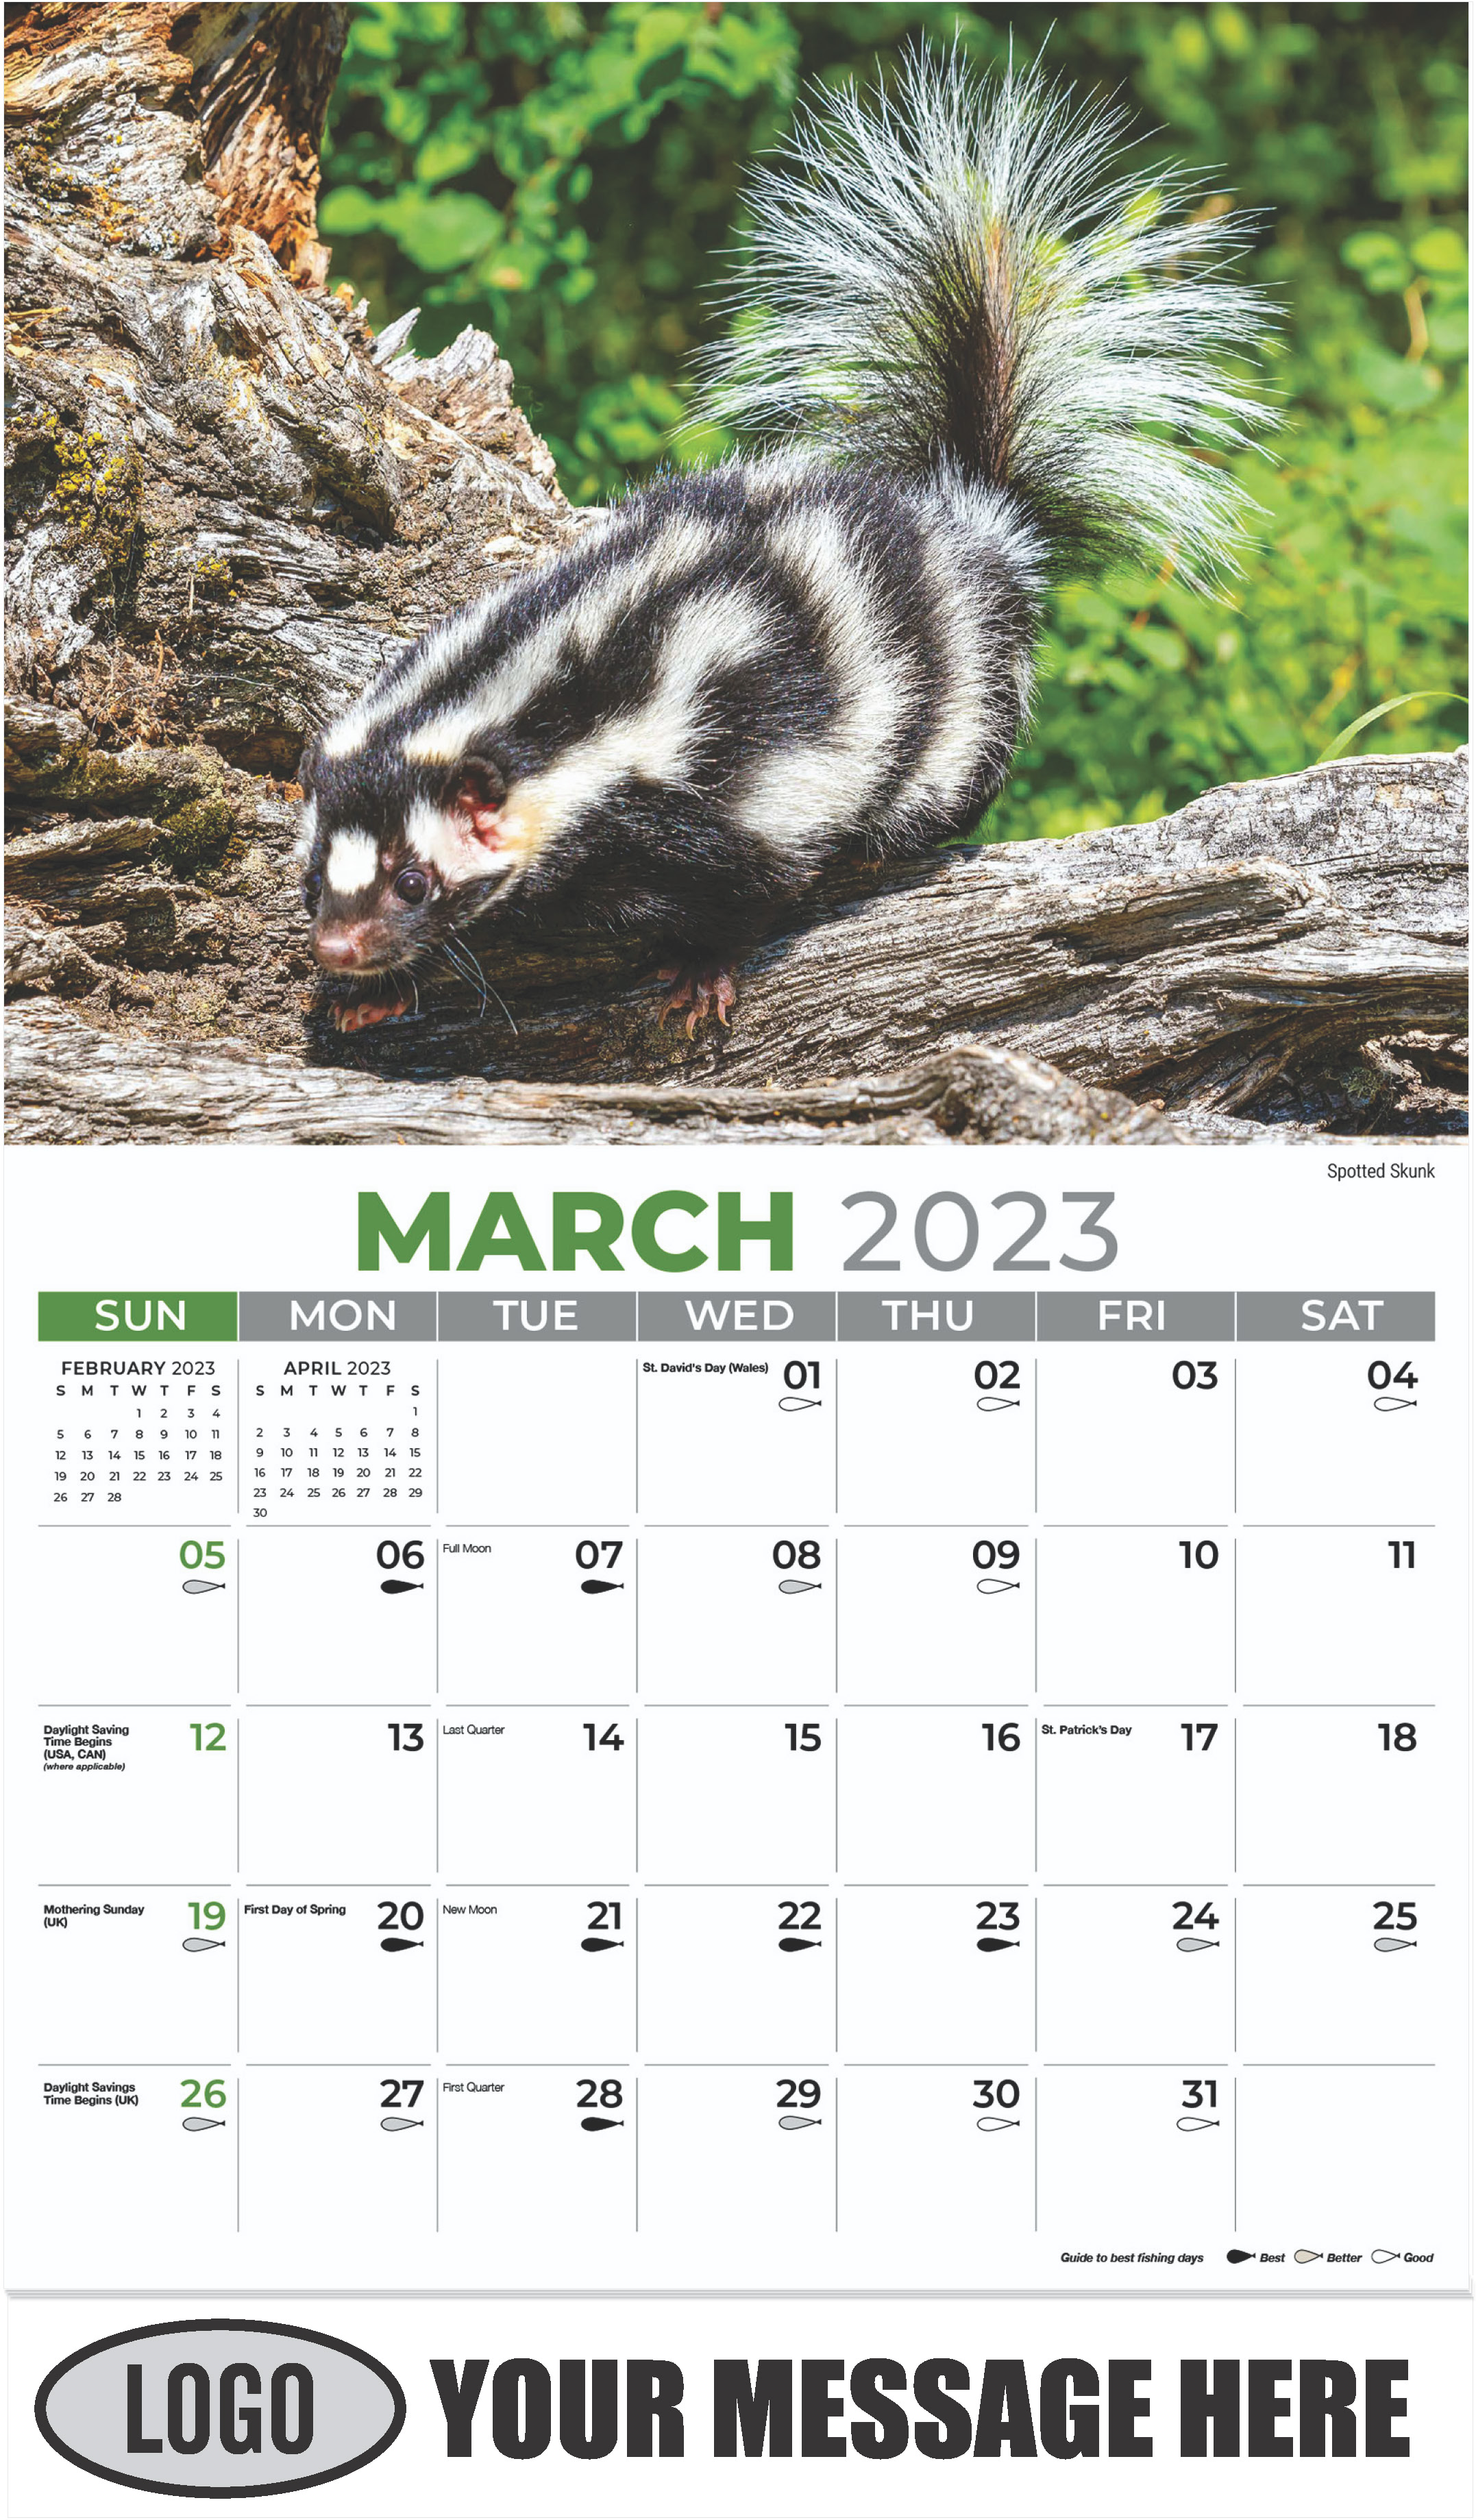 Spotted Skunk - March - North American Wildlife 2023 Promotional Calendar